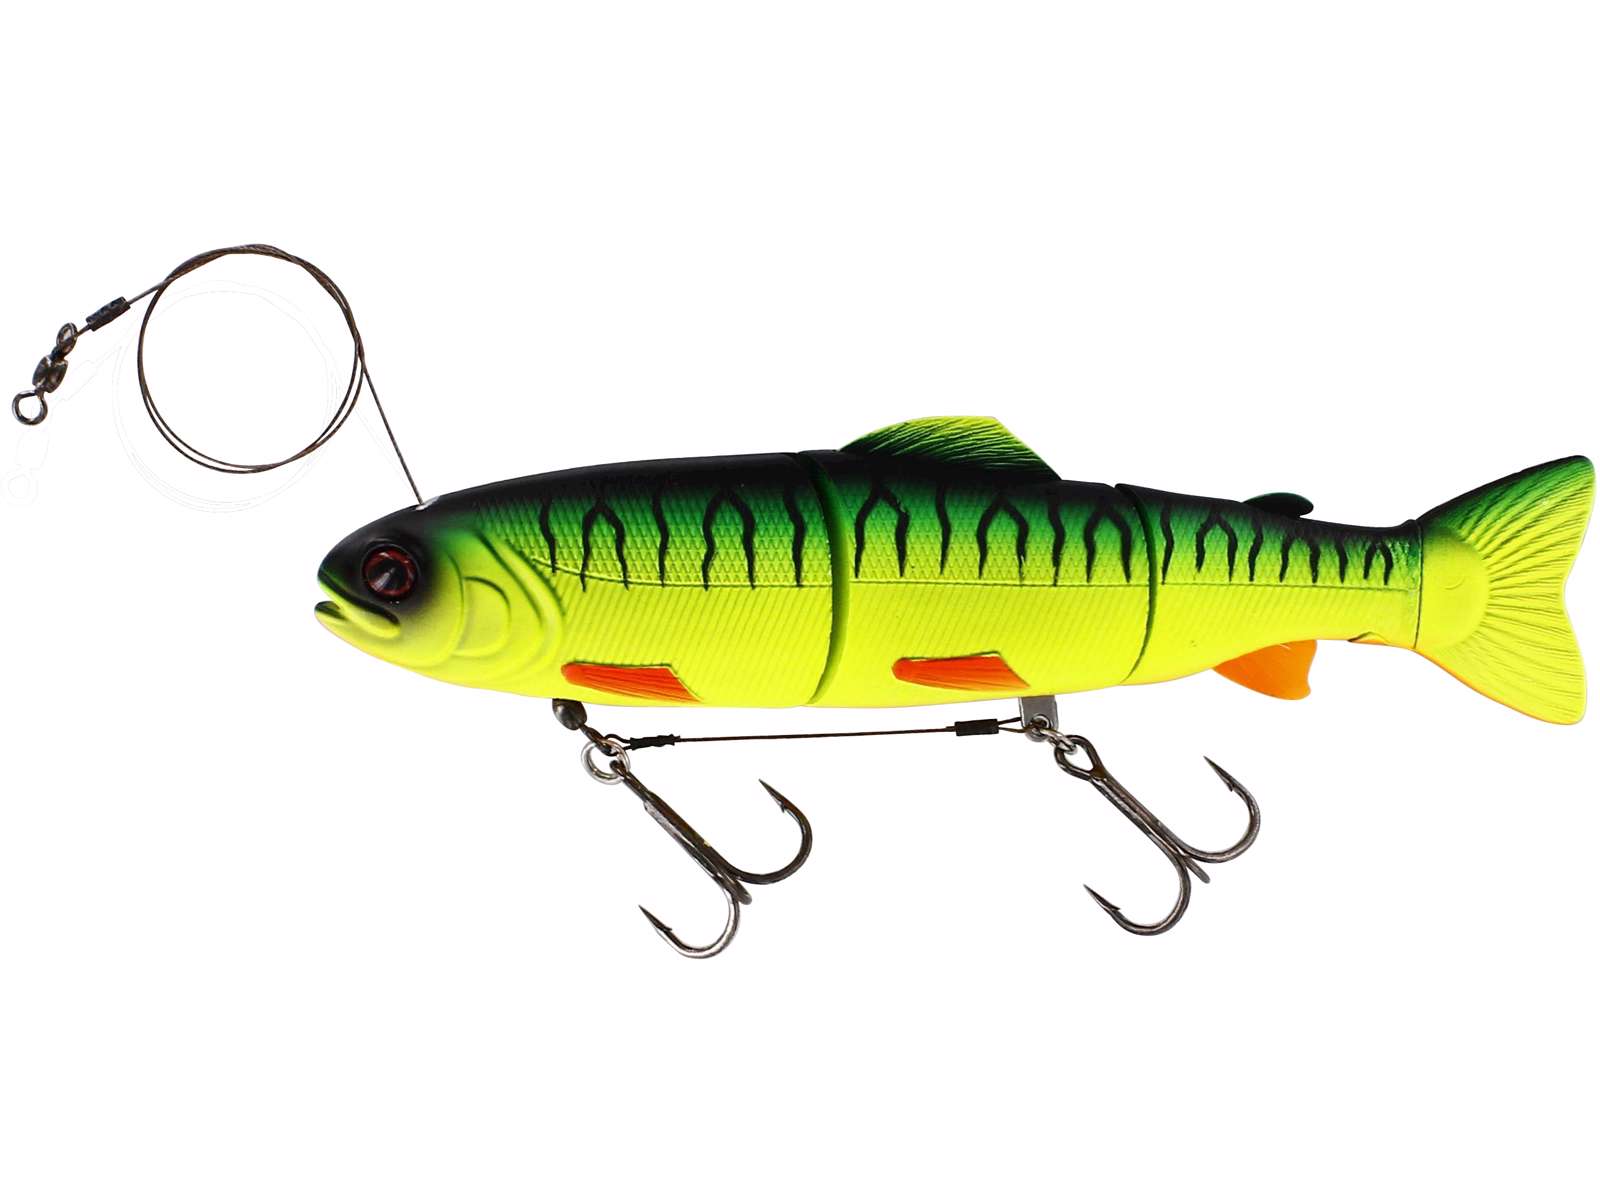 Westin Tommy The Trout Inline Lure